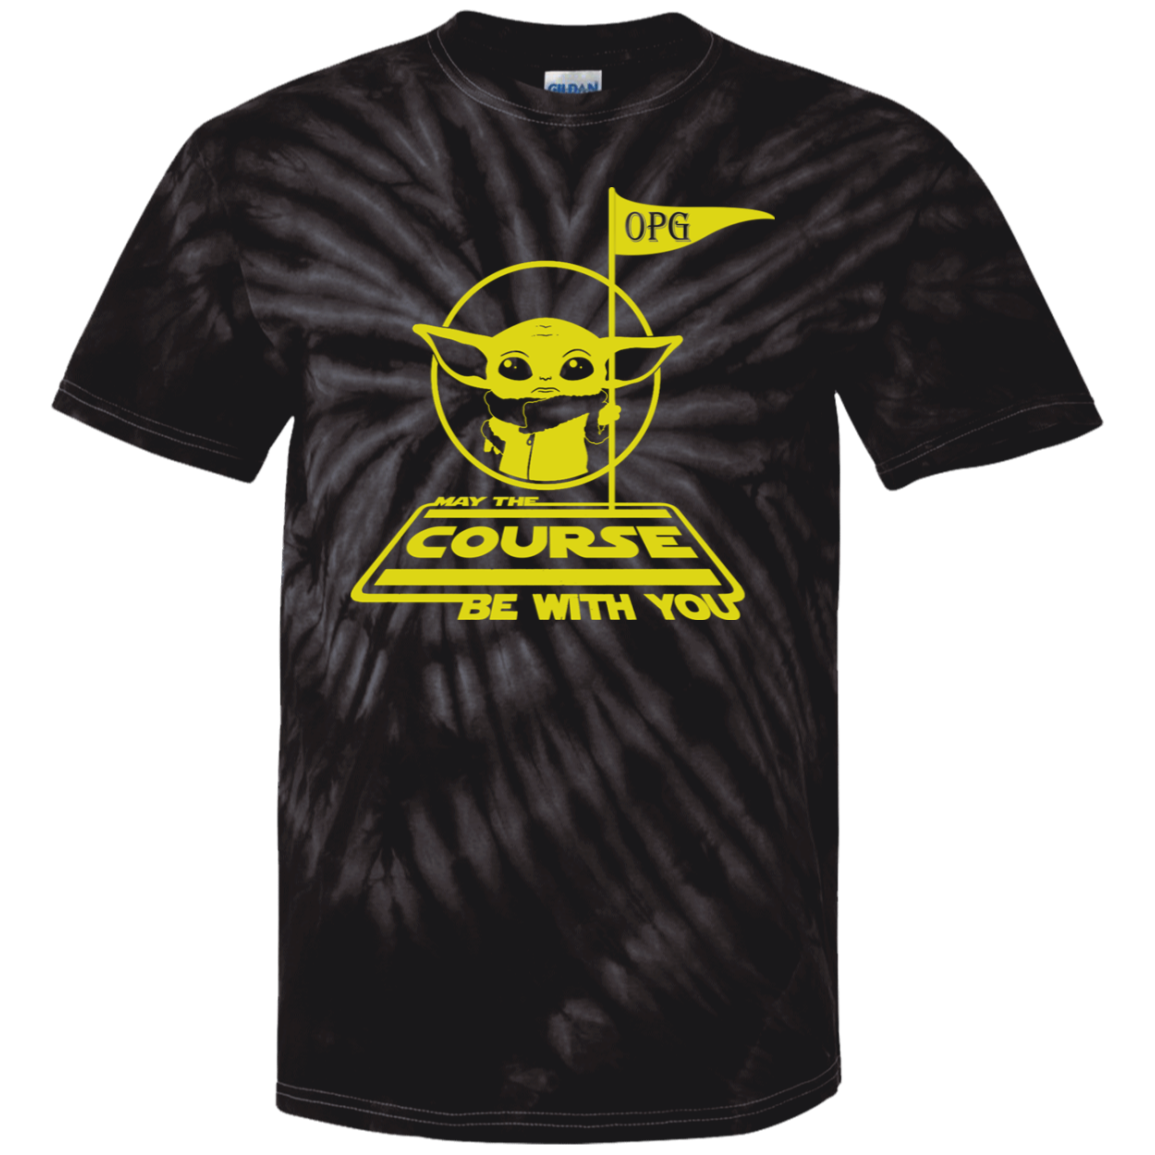 OPG Custom Design #21. May the course be with you. Star Wars Parody and Fan Art. Youth Tie-Dye T-Shirt